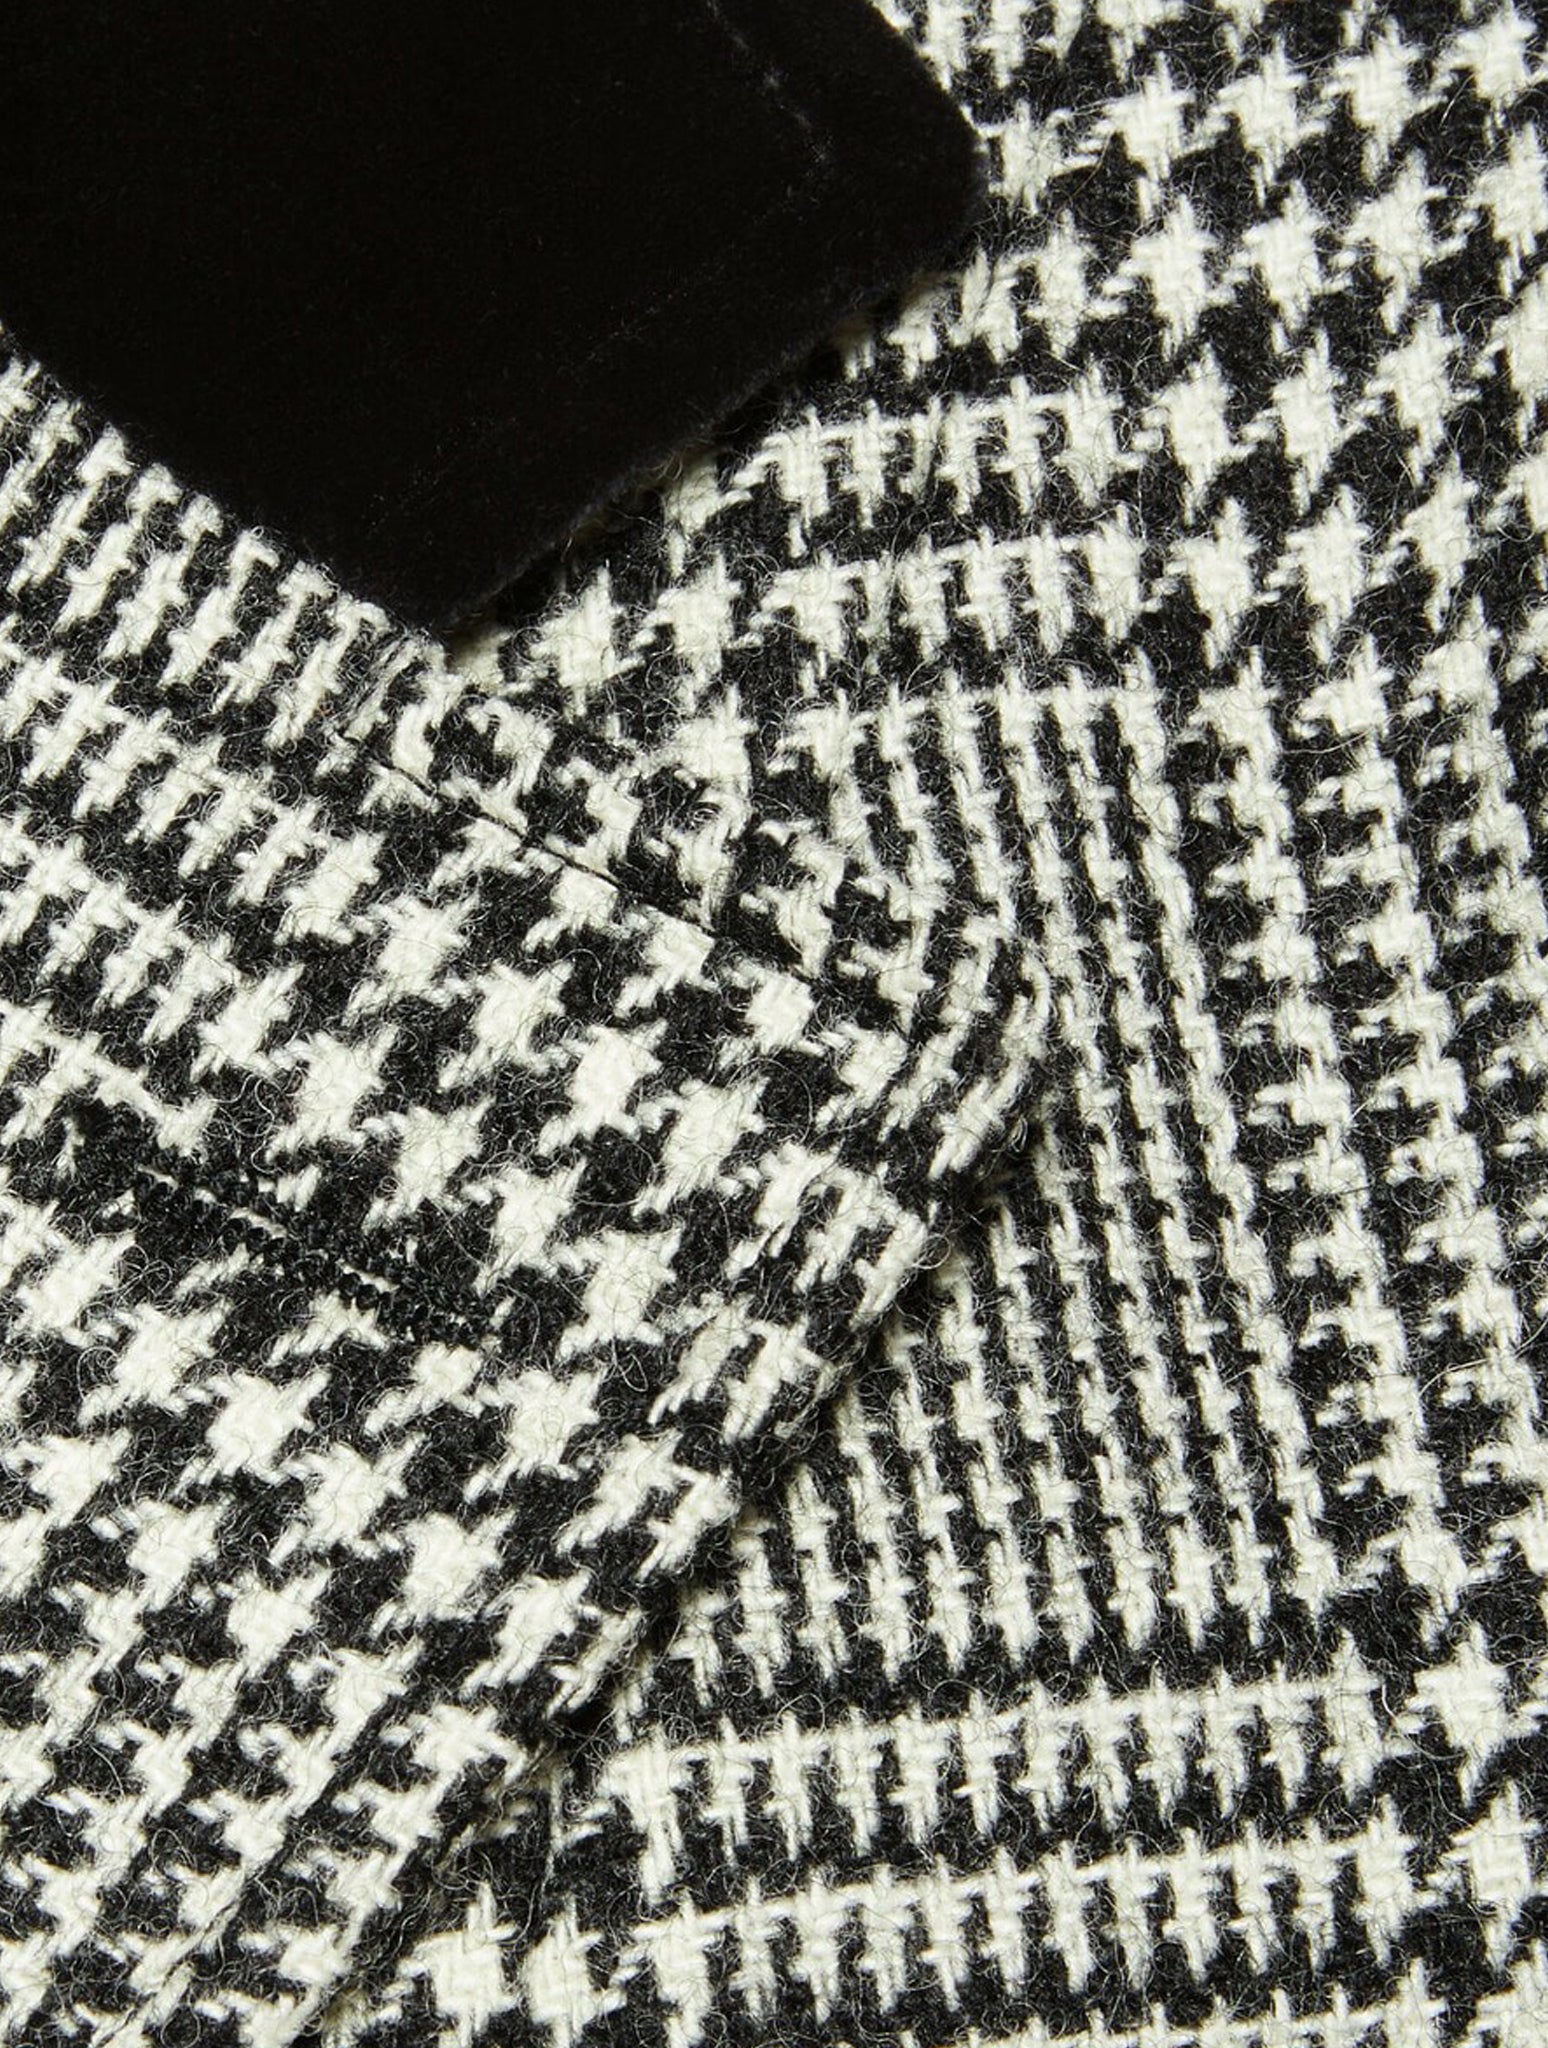 Prince of Wales checked jacket